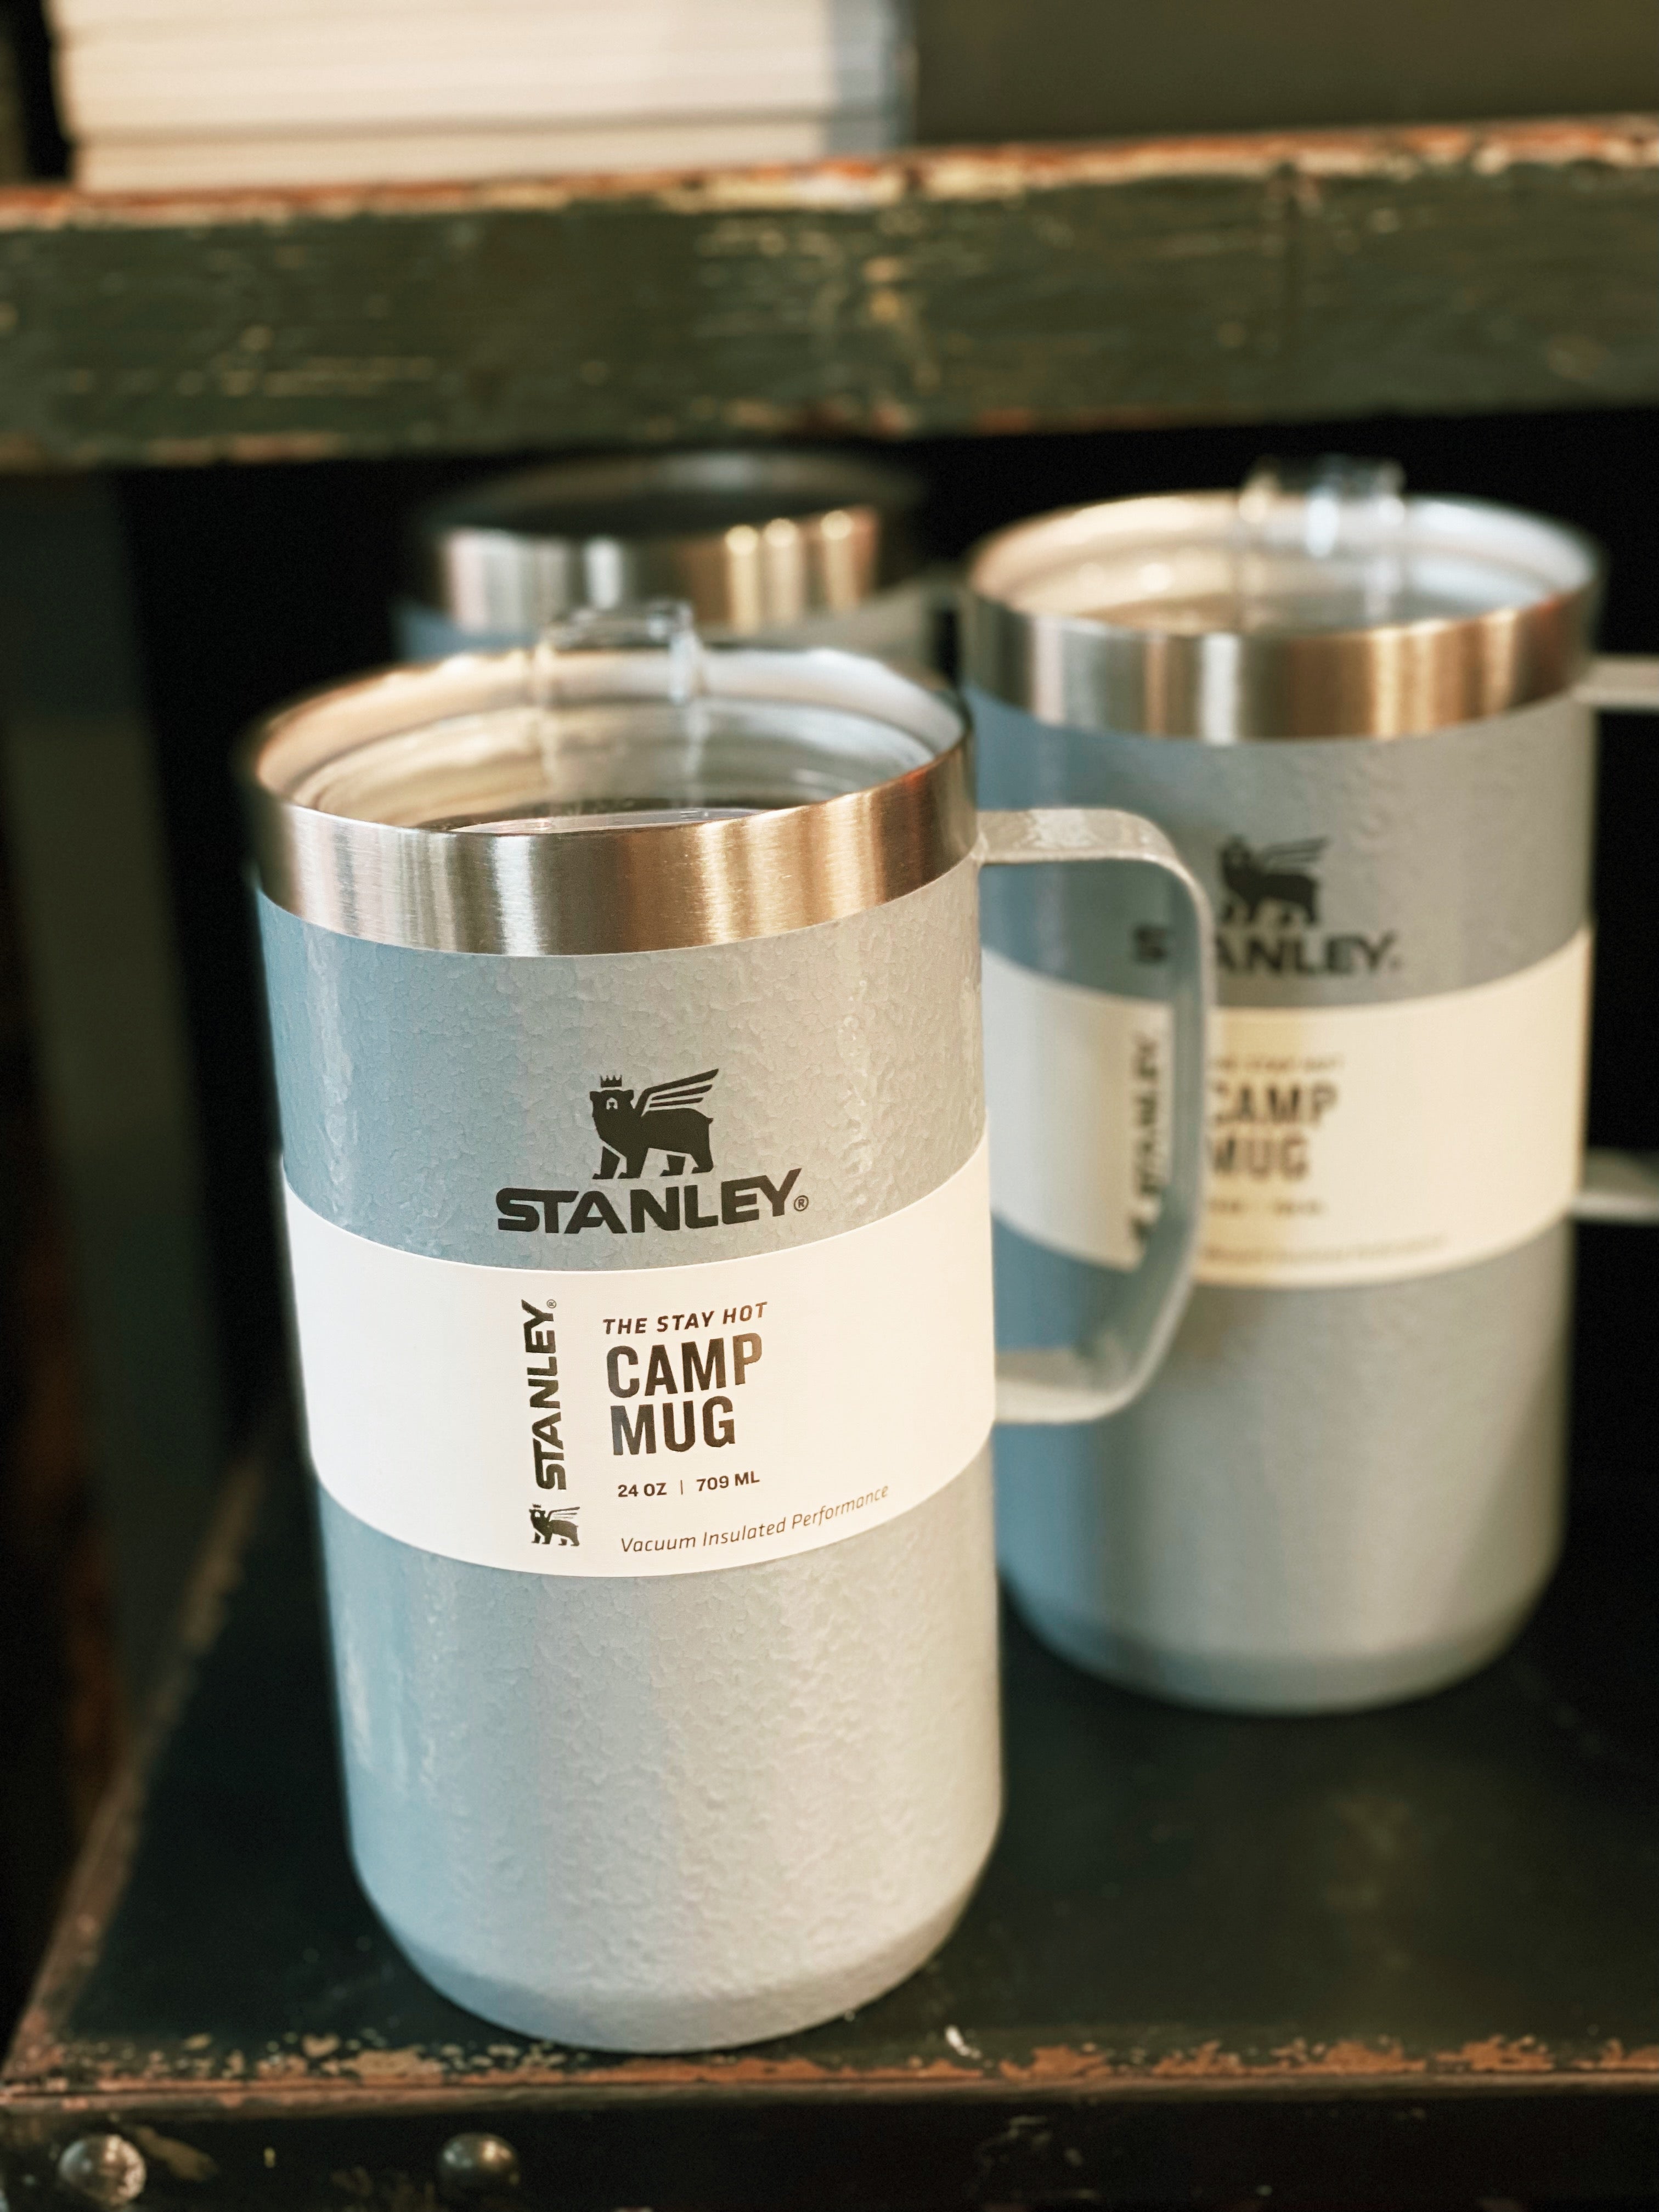 Stanley: THE STAY-HOT CAMP MUG